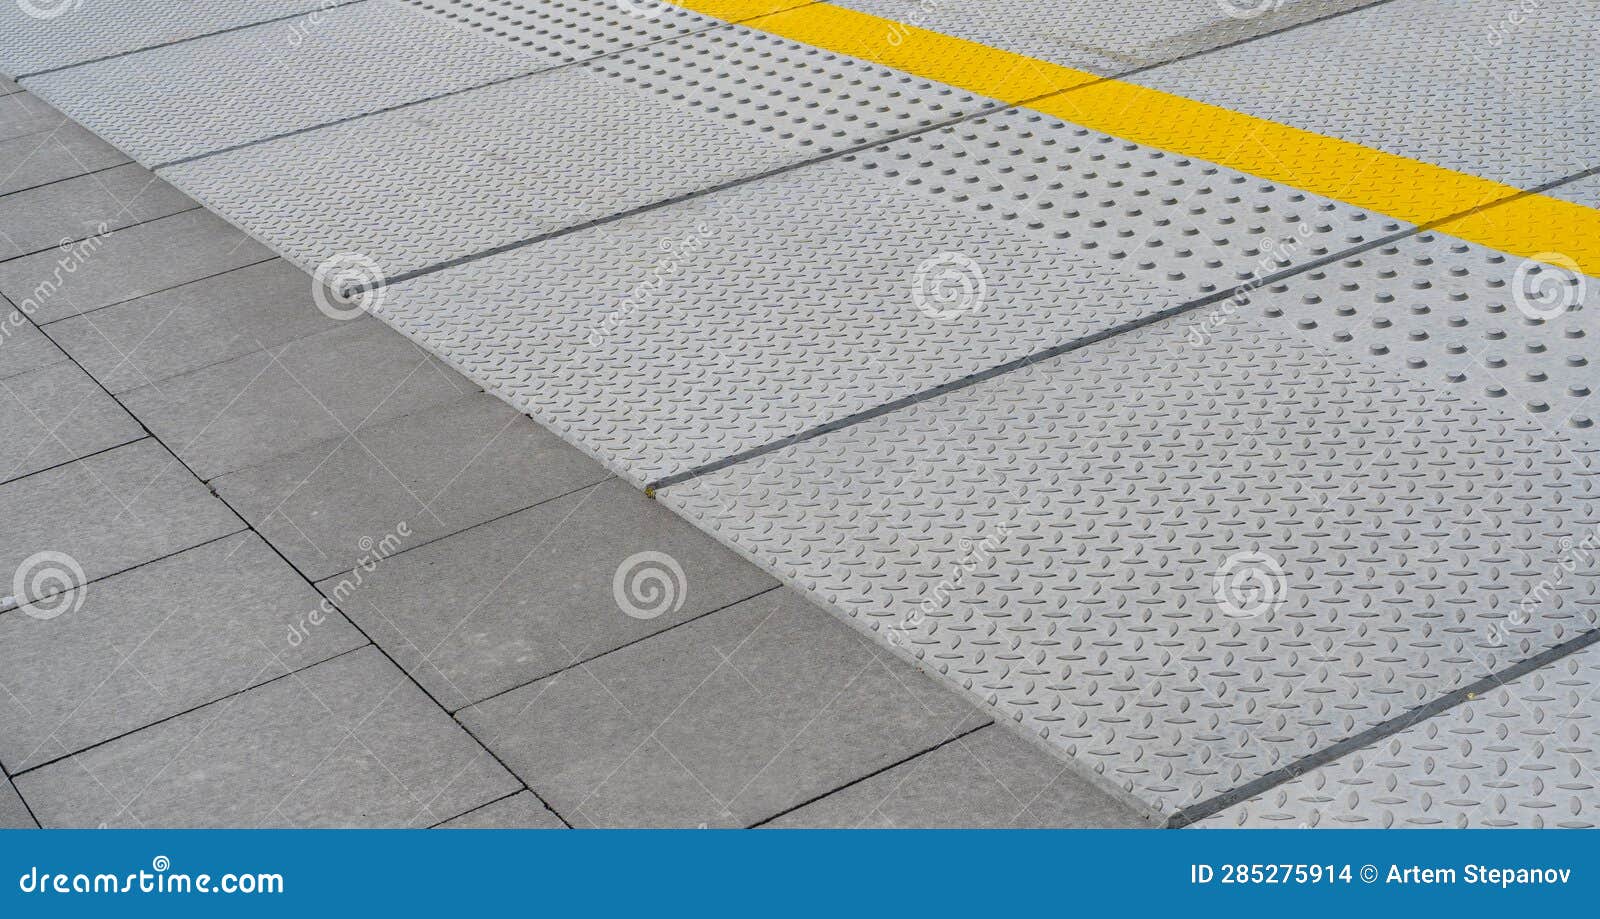 Tactile Paving on Modern Tiles Pathway for Blind Handicap, Safety ...